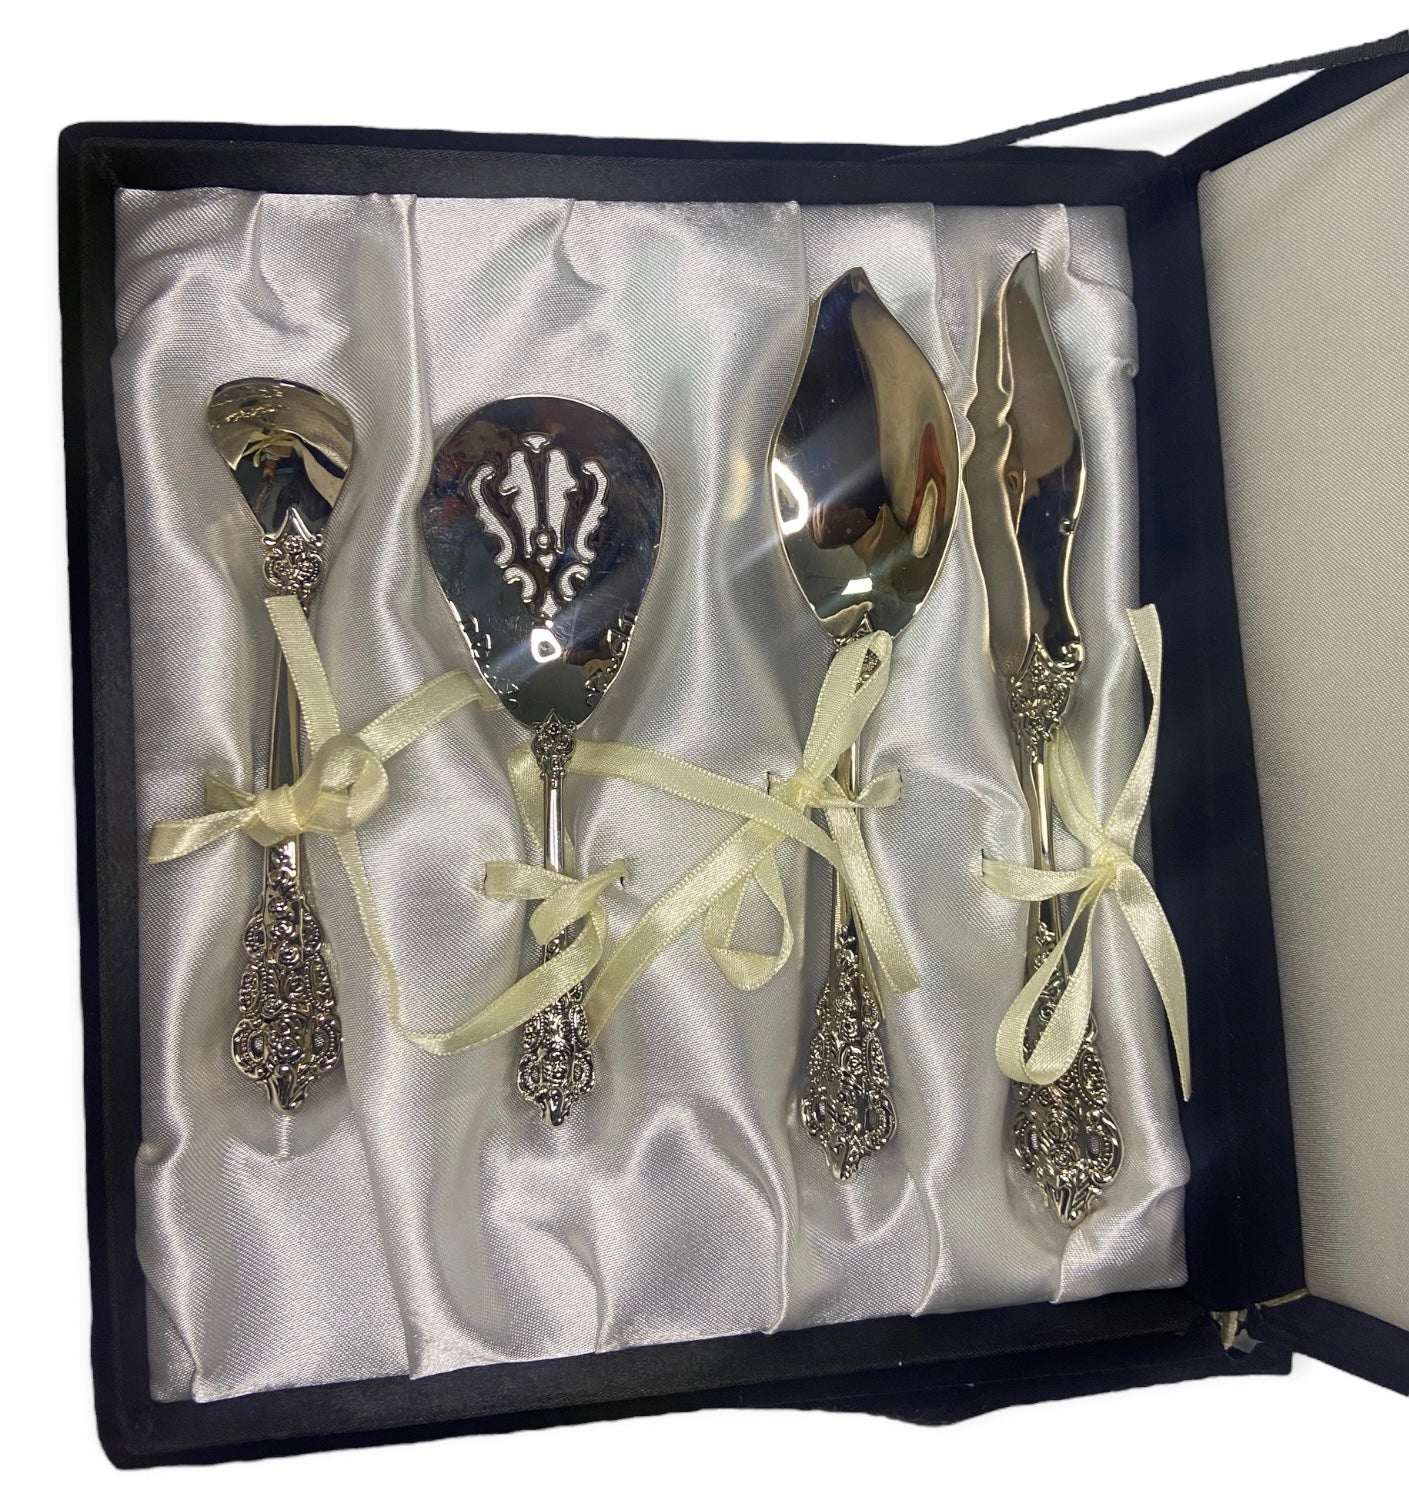 Wallace Silversmiths silver plated 4pc hostess serving set in velvet box